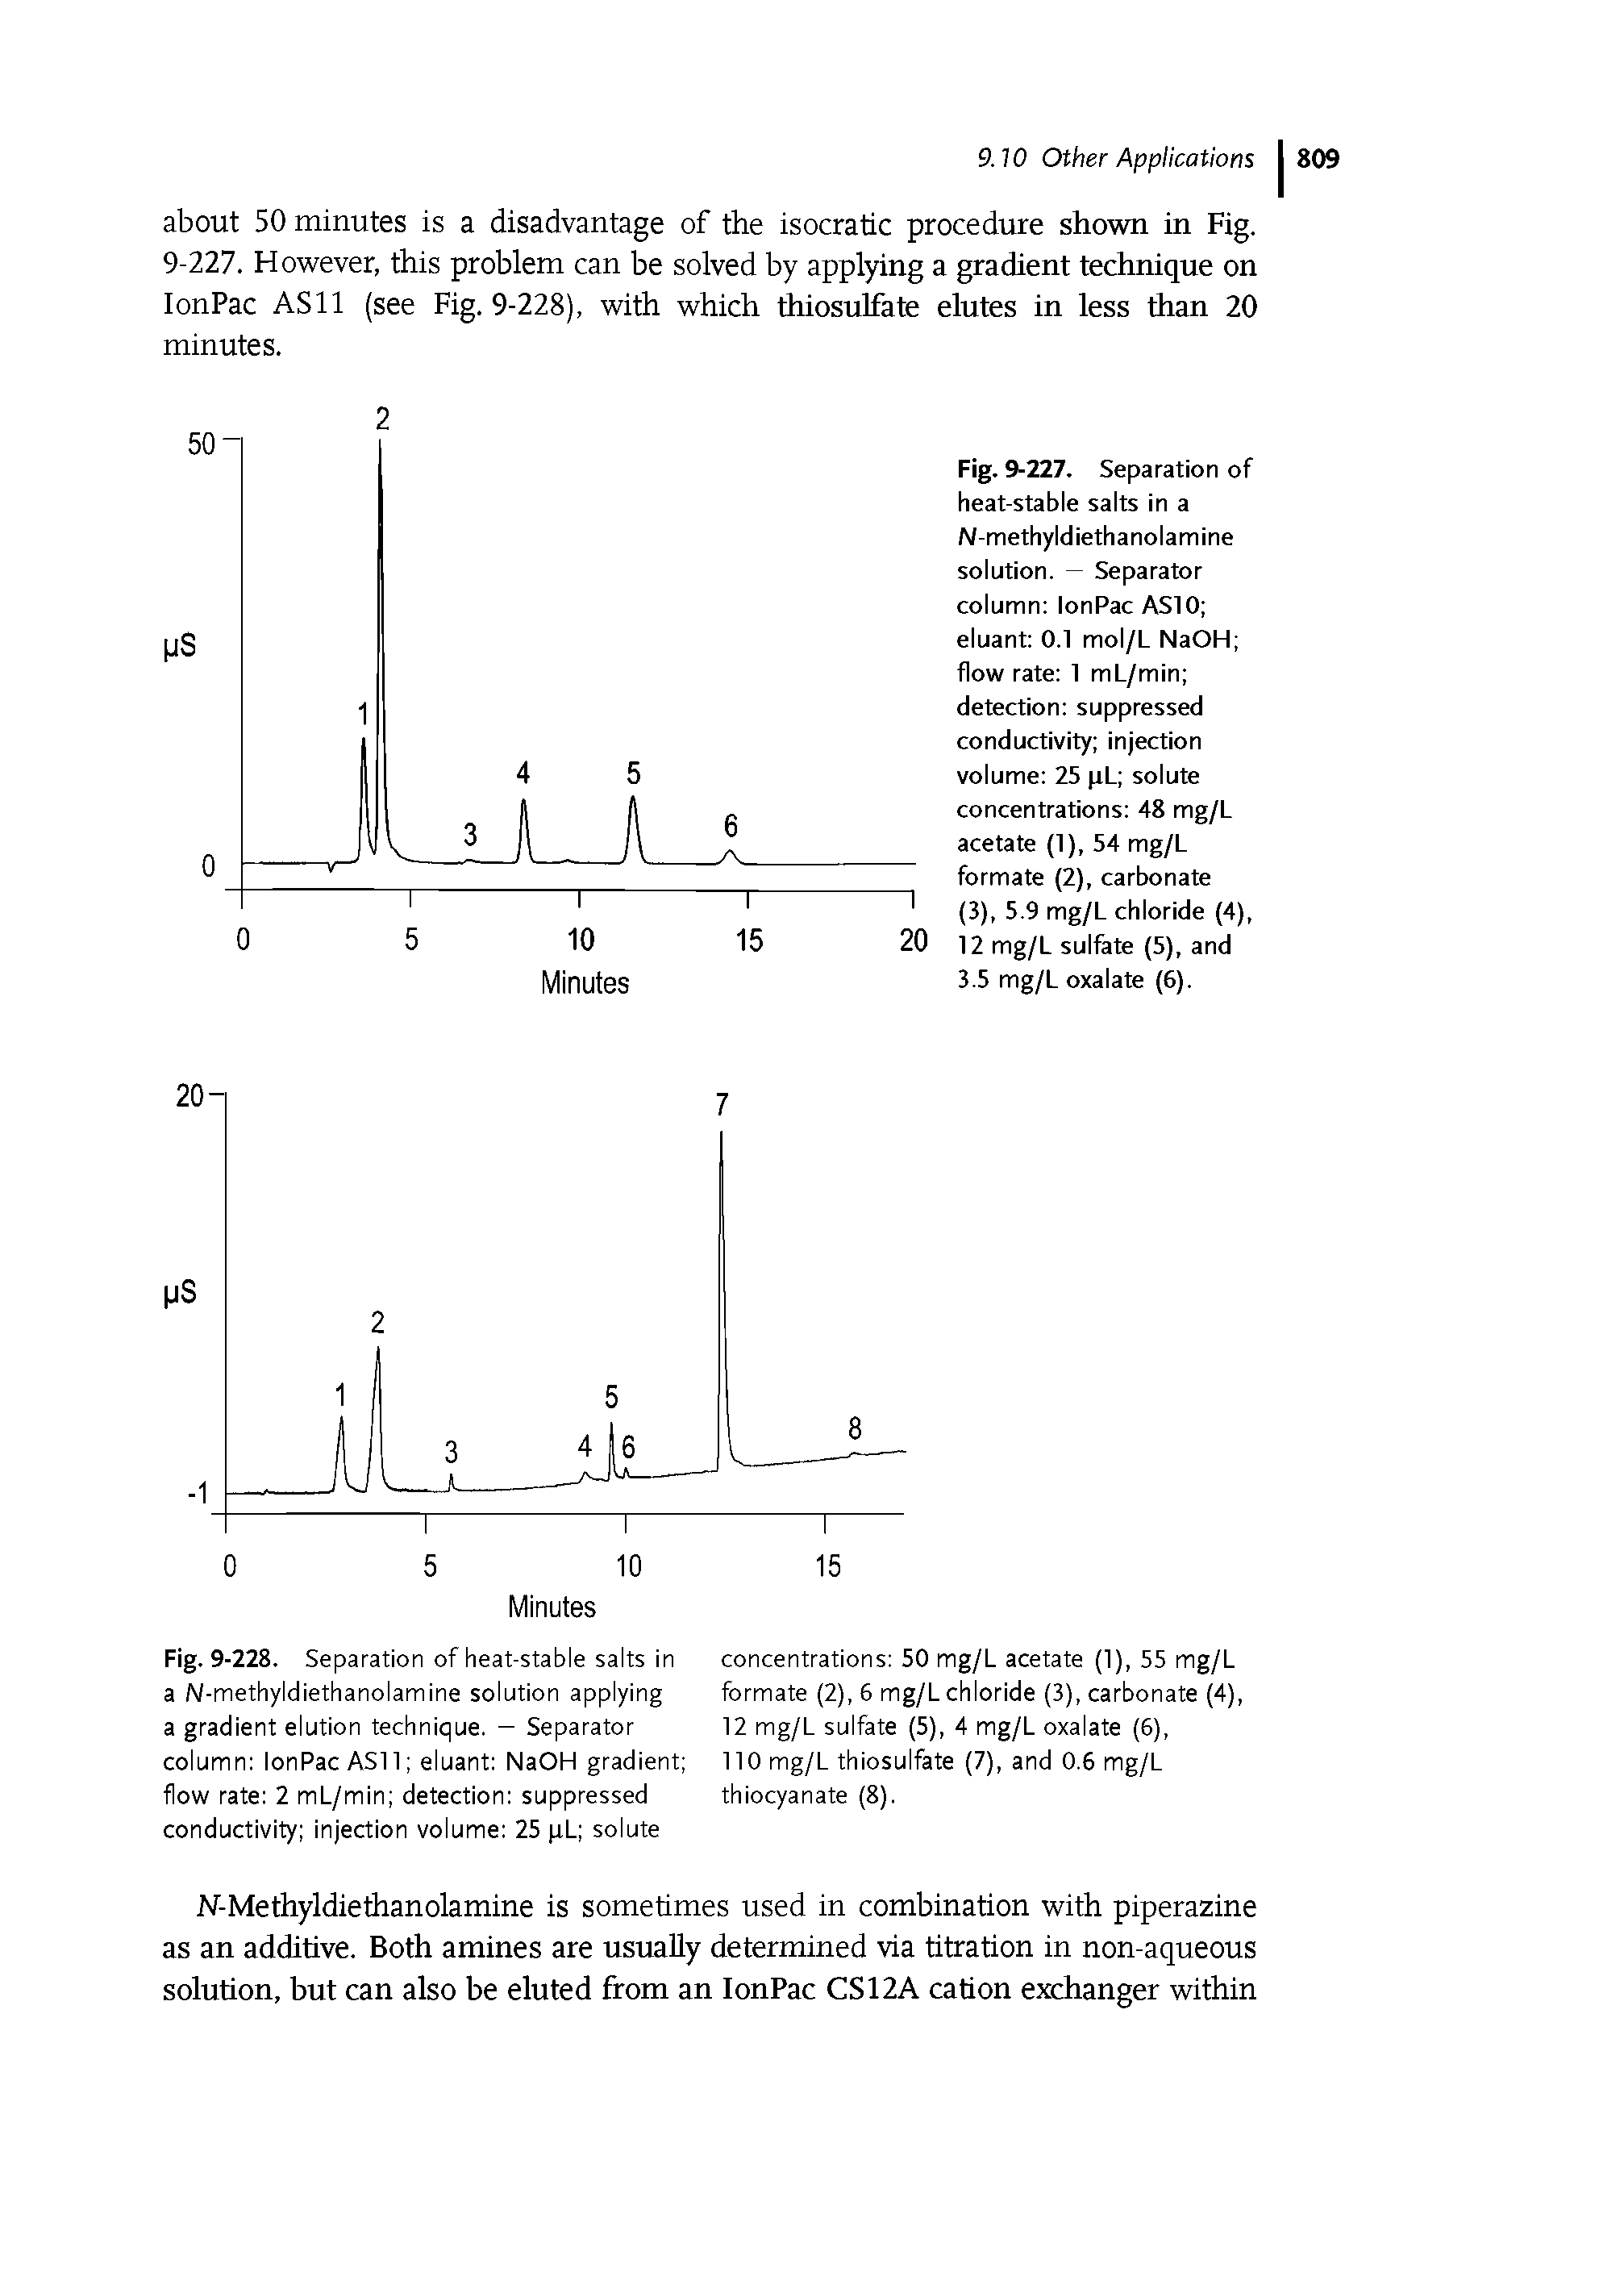 Fig. 9-227. Separation of heat-stable salts in a N-methyIdiethanolamine solution. - Separator column lonPac ASIO eluant 0.1 mol/L NaOH flow rate 1 mL/min detection suppressed conductivity injection volume 25 pL solute concentrations 48 mg/L acetate (1), 54 mg/L formate (2), carbonate (J), 5.9 mg/L chloride (4), 12 mg/L sulfate (5), and J.5 mg/L oxalate (6).